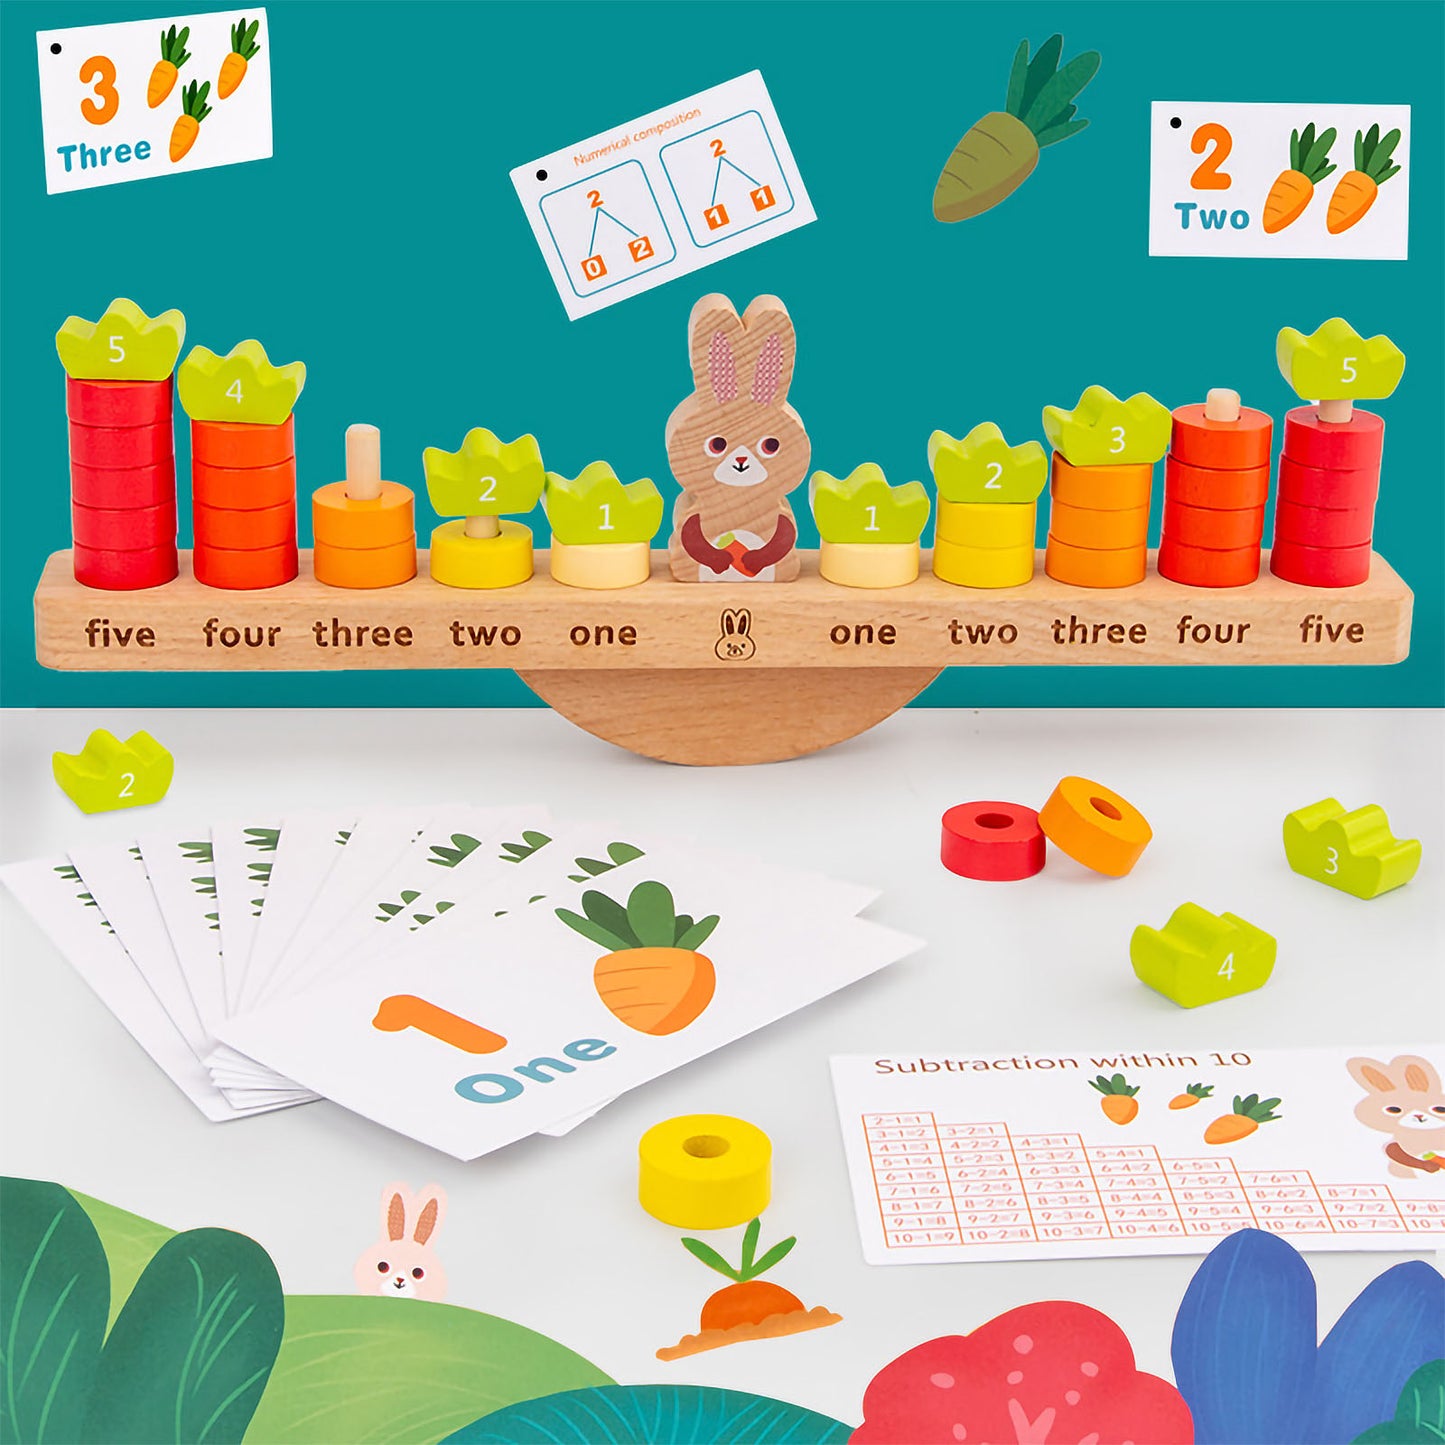 NOOLY Rabbit Wooden Balance Game Number Counting GamesAge 3+ Years Old PHJM-02